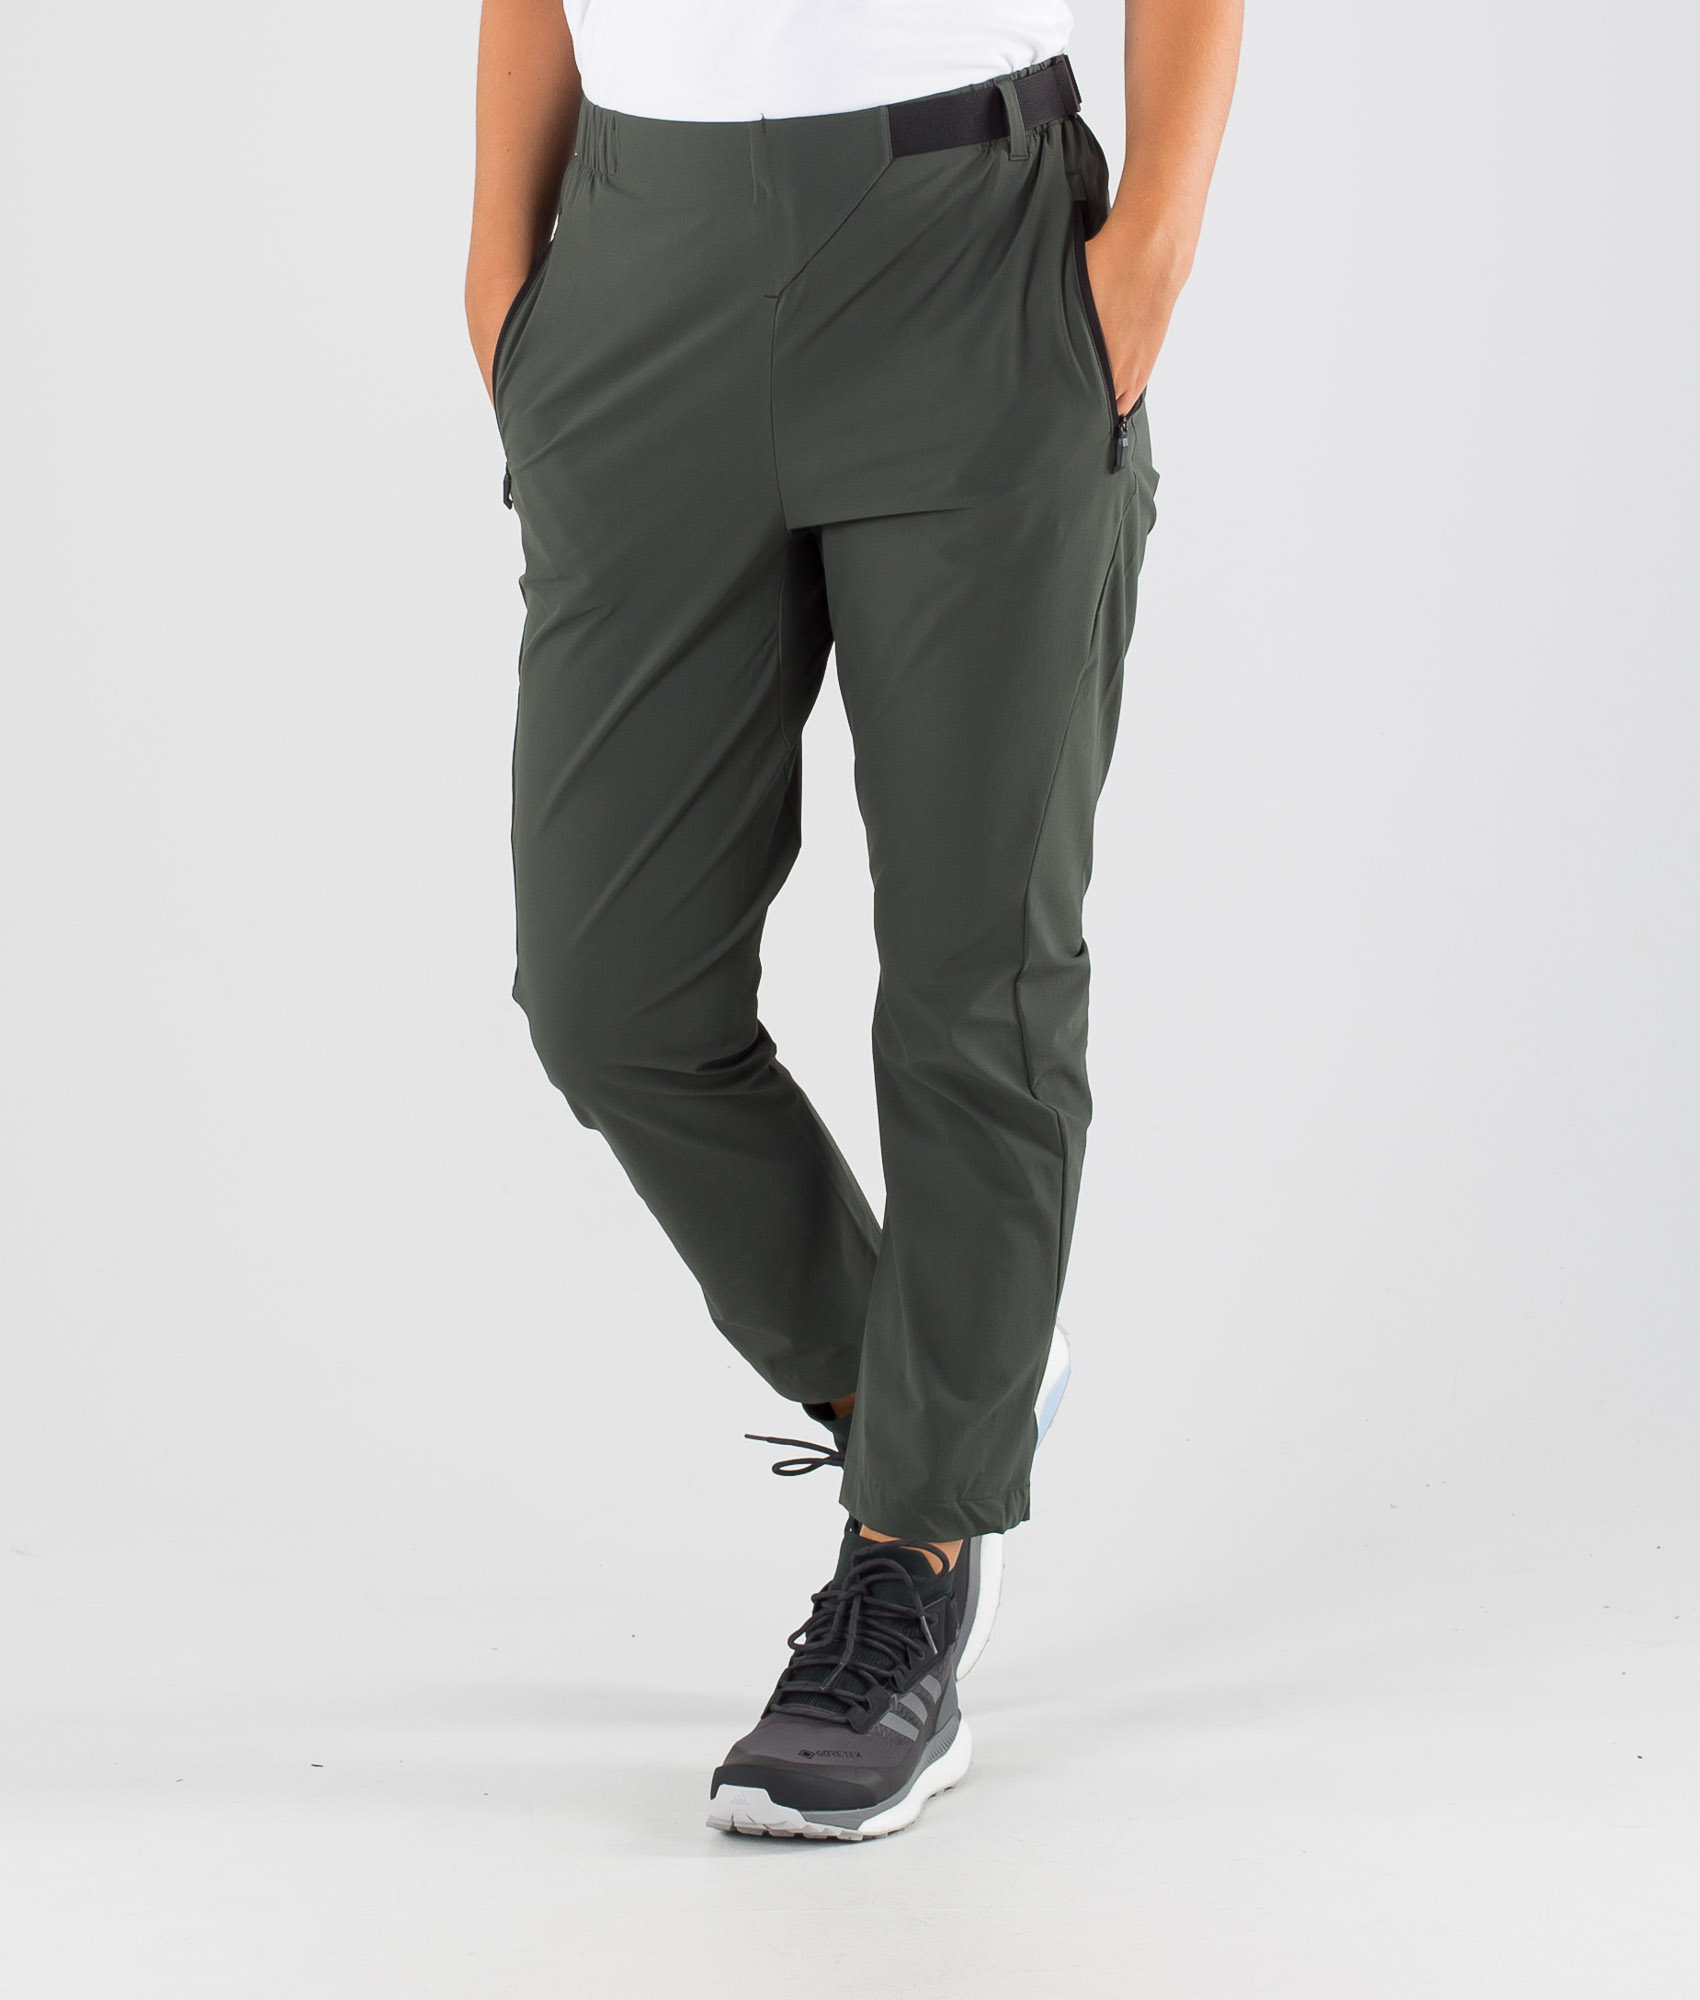 Adidas Terrex Hike Outdoor Trousers 